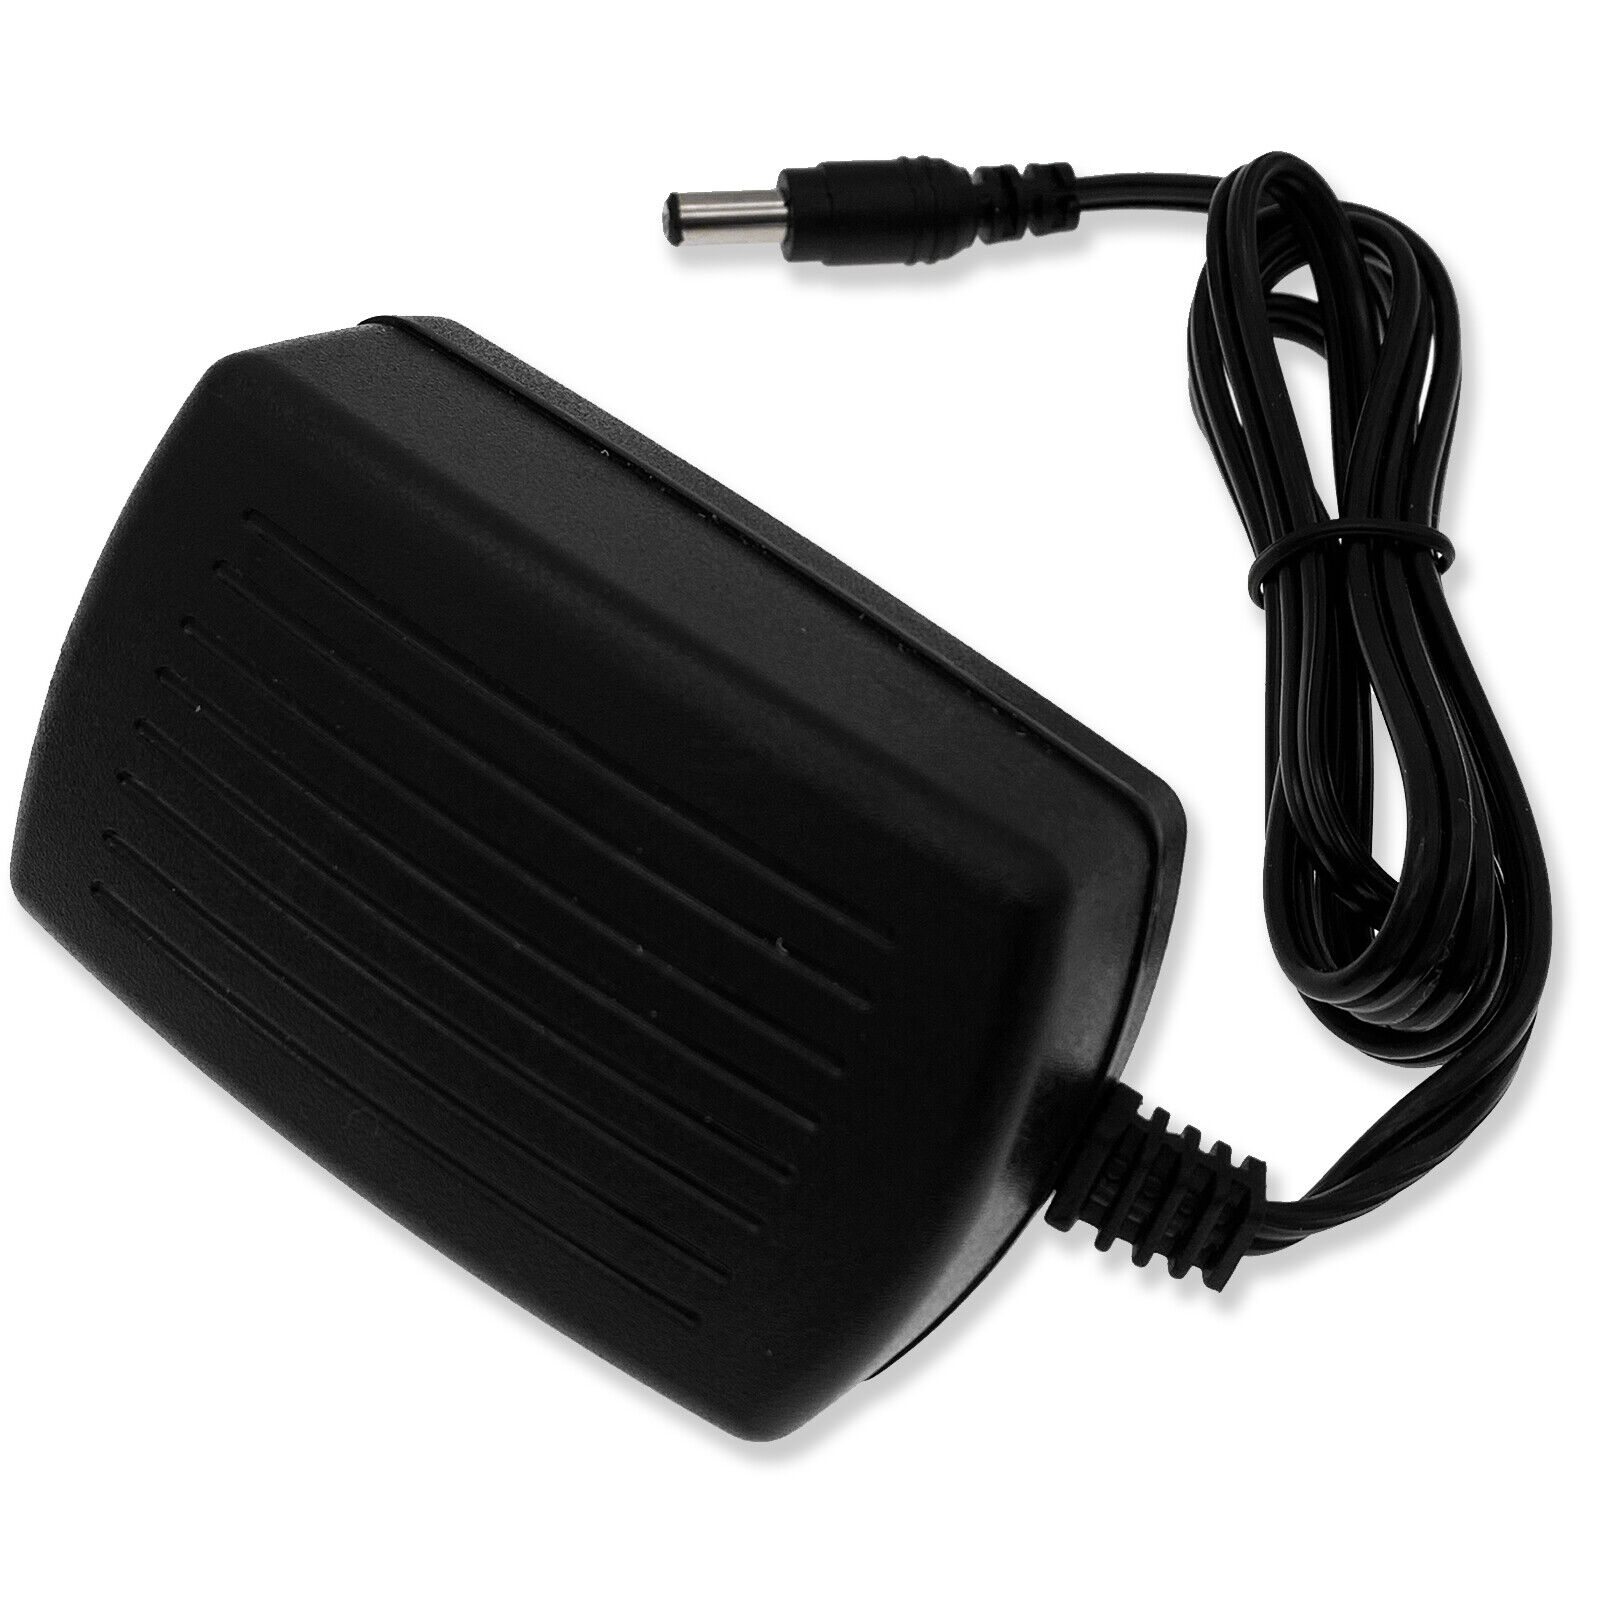 *Brand NEW*PNLV226CE PNLV226 5.5V 500MA AC Adapter Power Charger